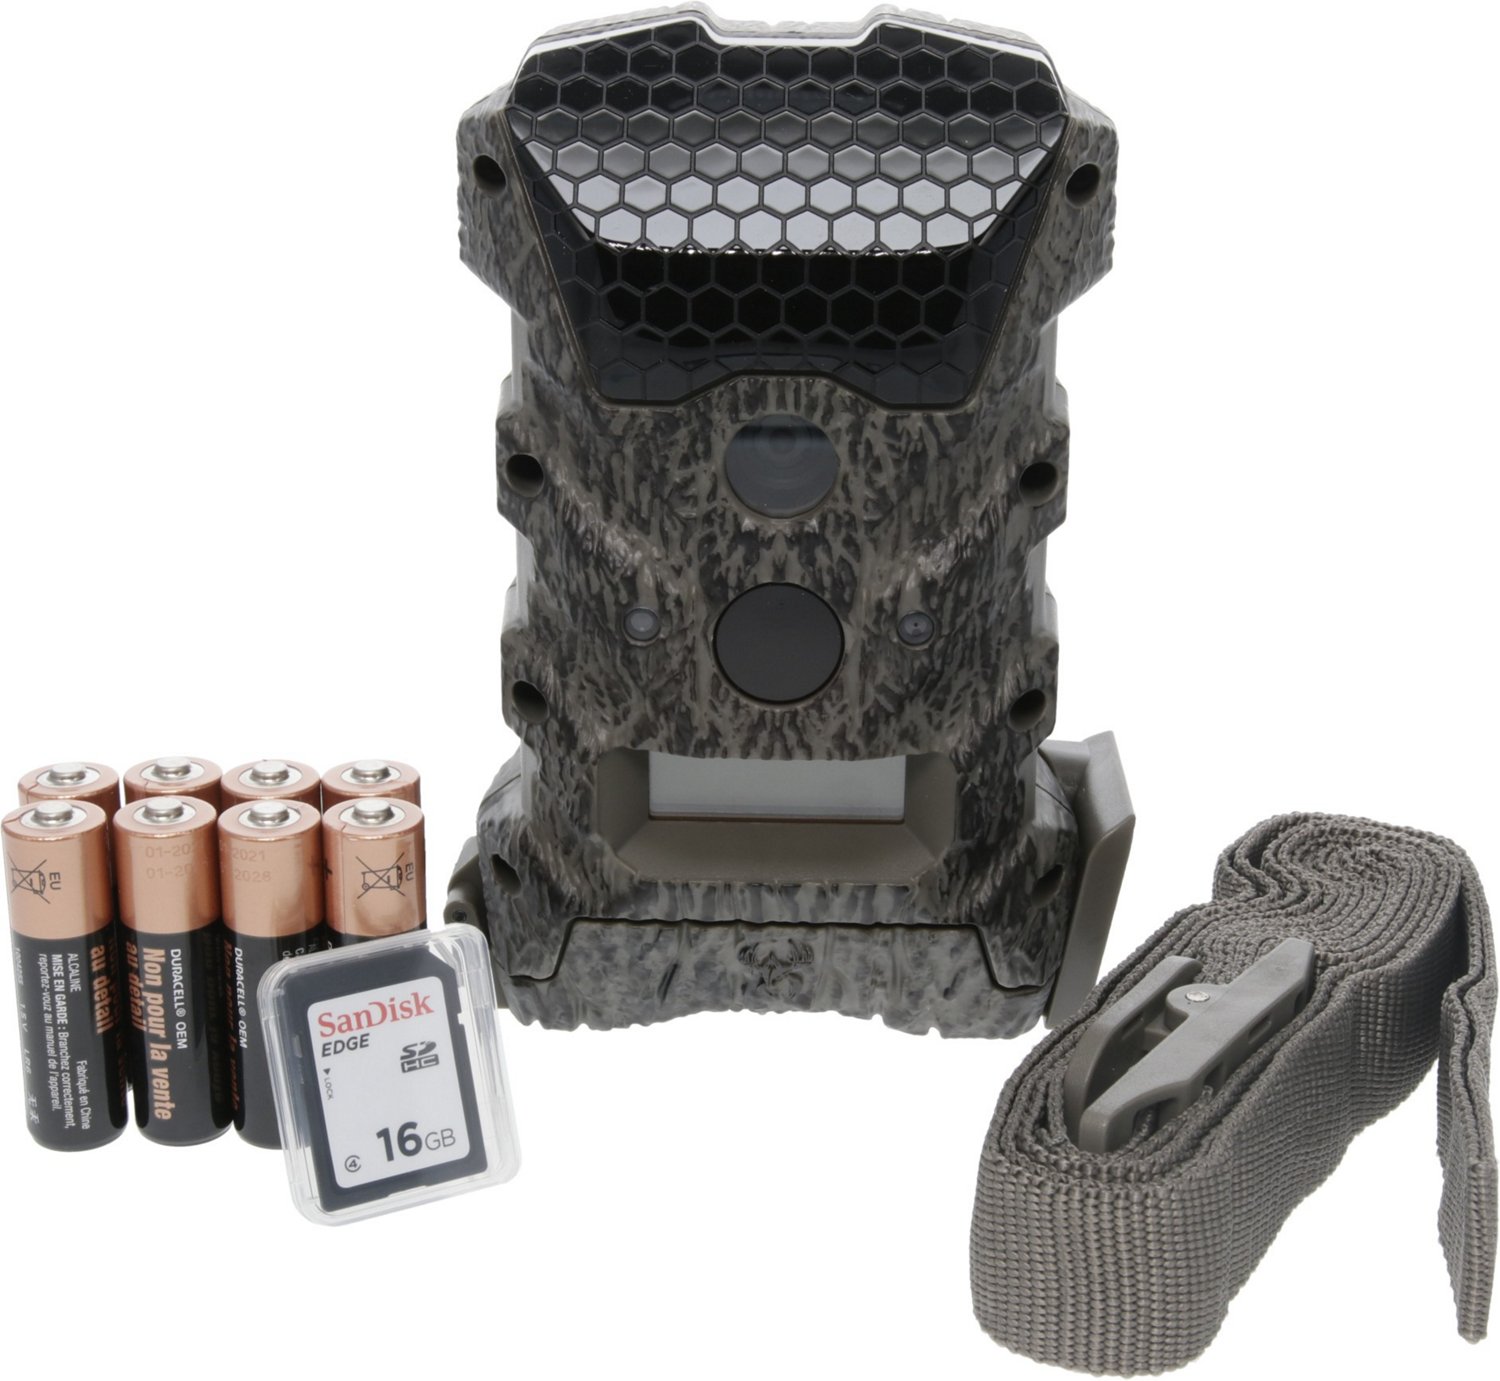 wildgame-innovations-mirage-pro-lights-out-32-mp-game-camera-academy